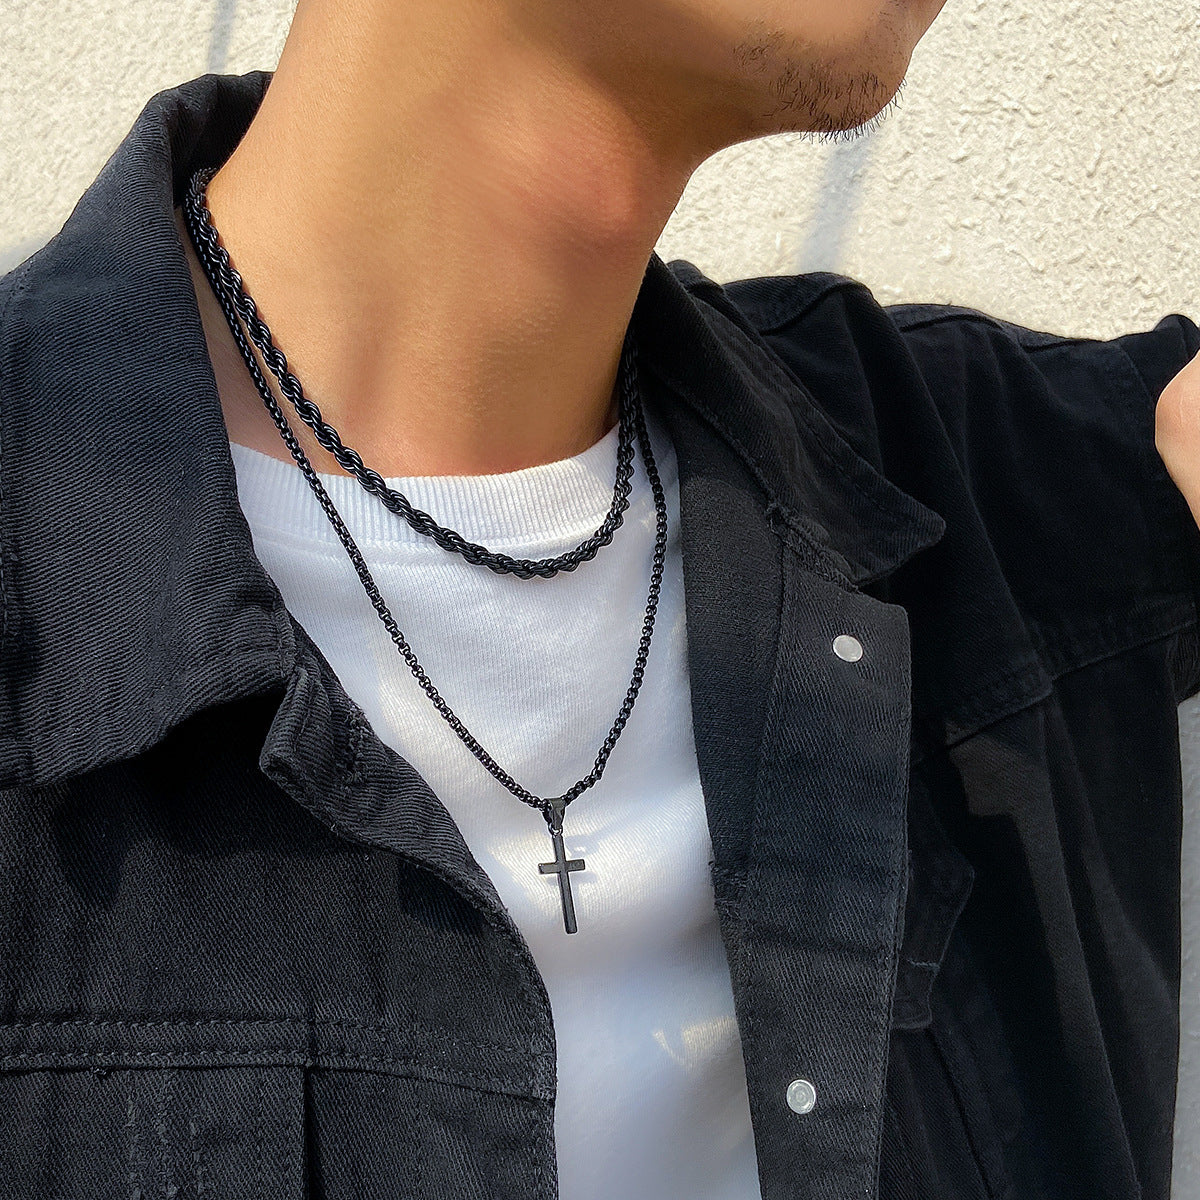 Men Simple fashion double stacked cross design pendant necklace